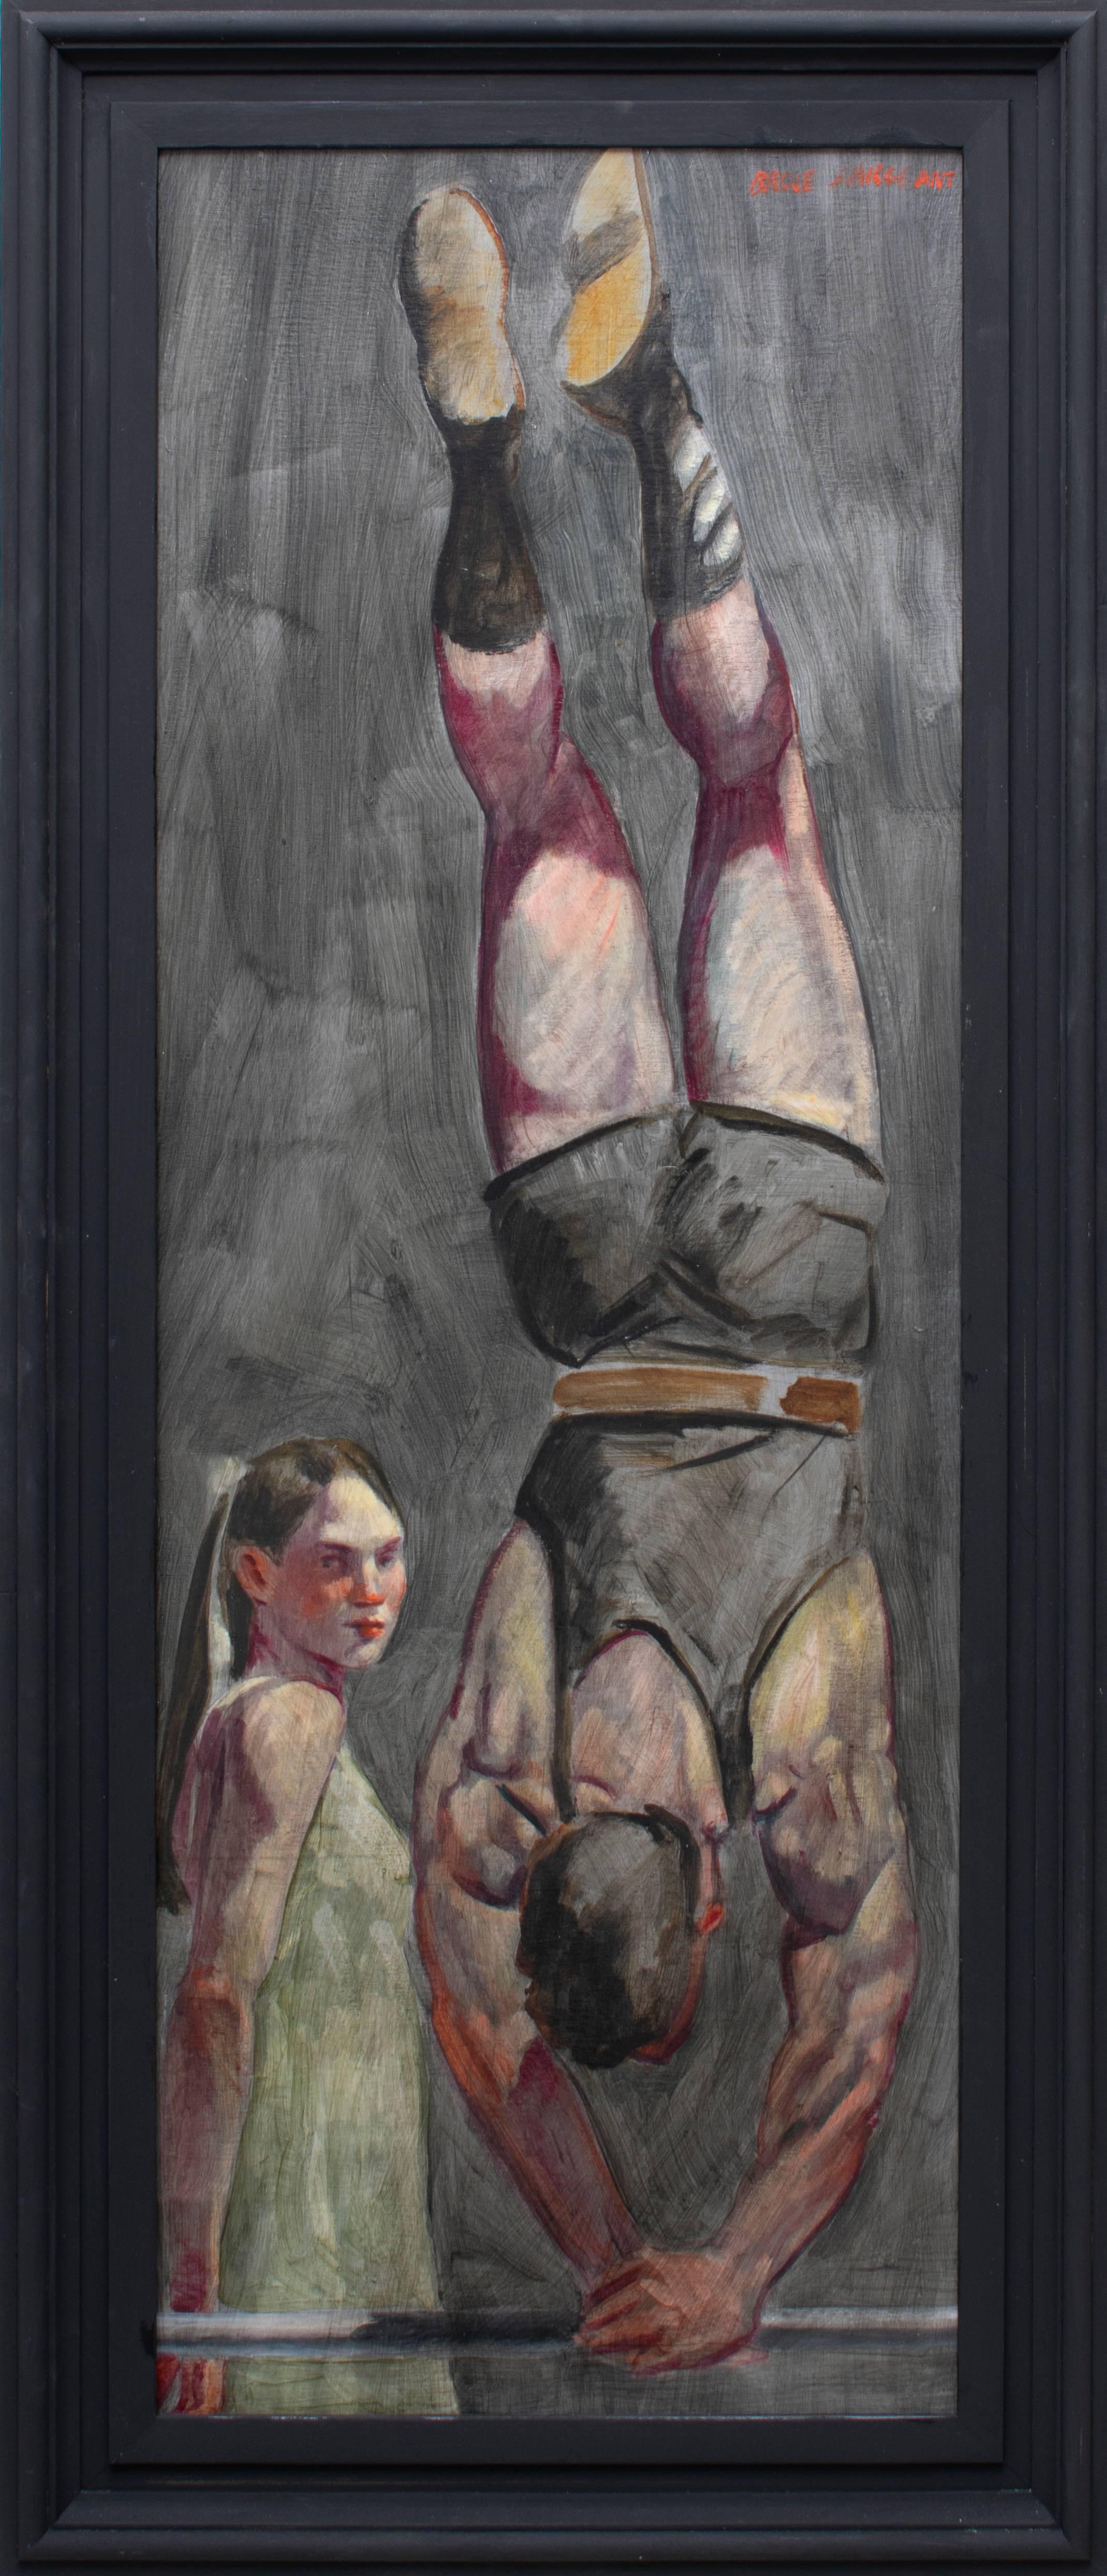 Handstand (Large Figurative Painting on Canvas of an Athlete and a Girl) 3